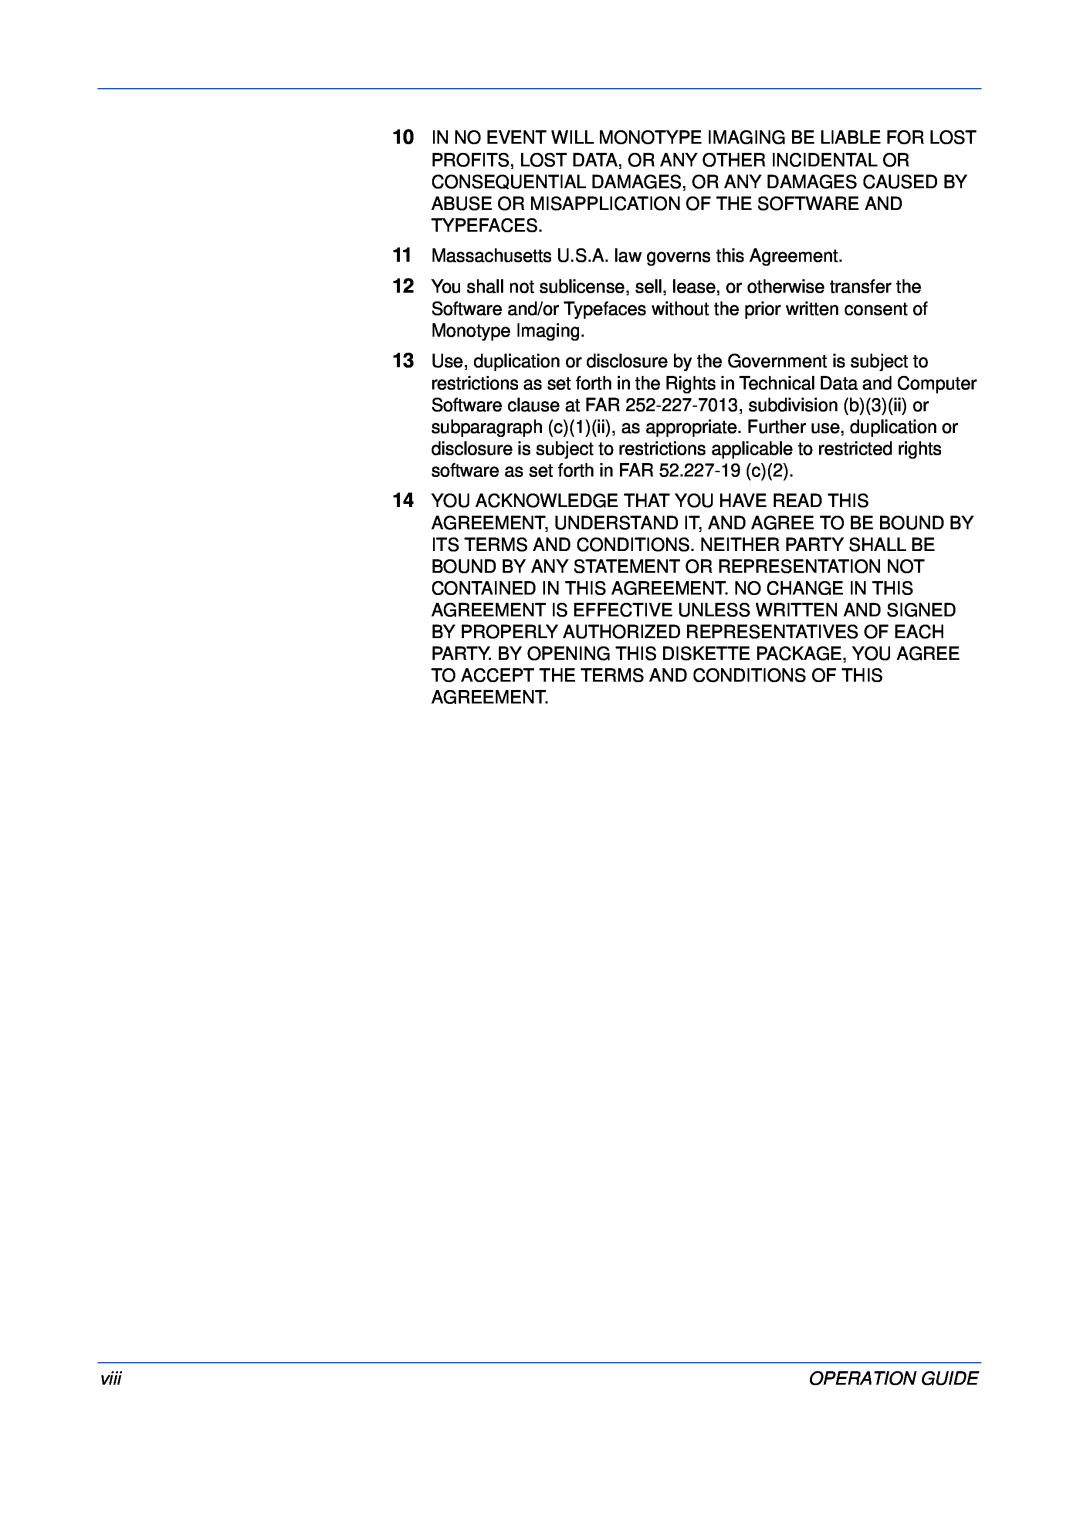 Kyocera FS-C5015N, FS-C5025N manual 11Massachusetts U.S.A. law governs this Agreement, viii, Operation Guide 